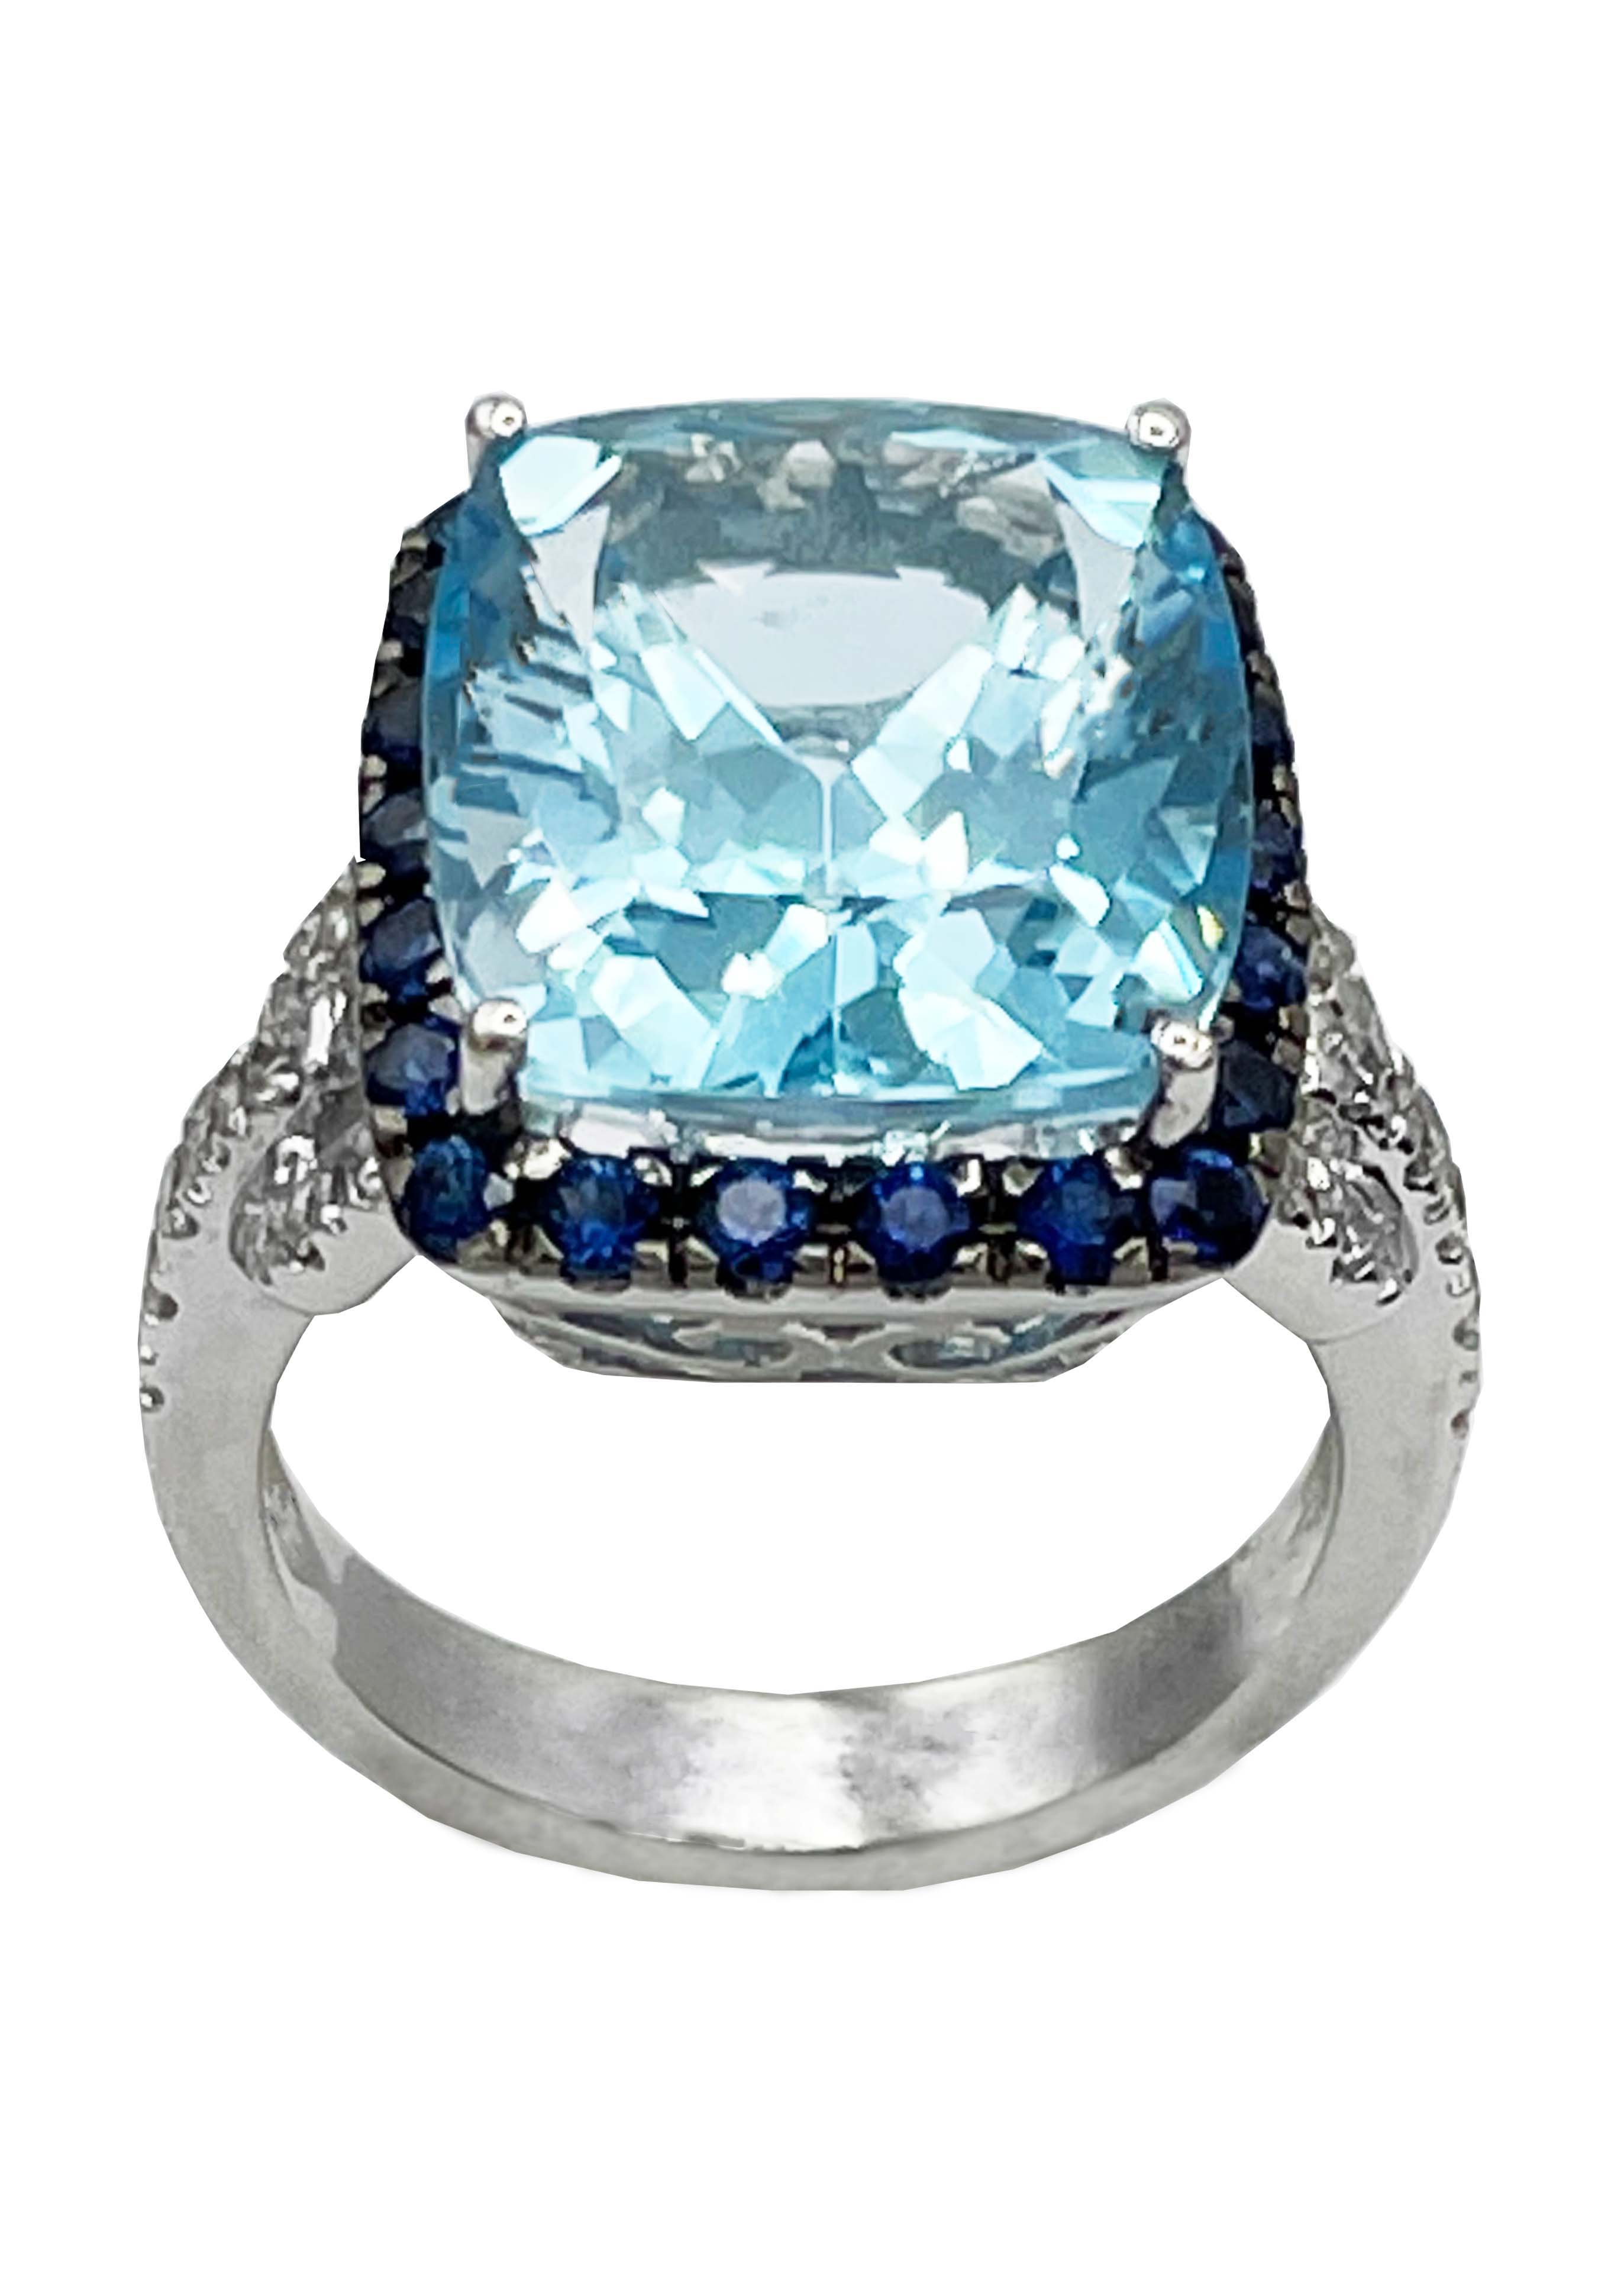 18k White Gold Blue Topaz and Sapphire Ring Image